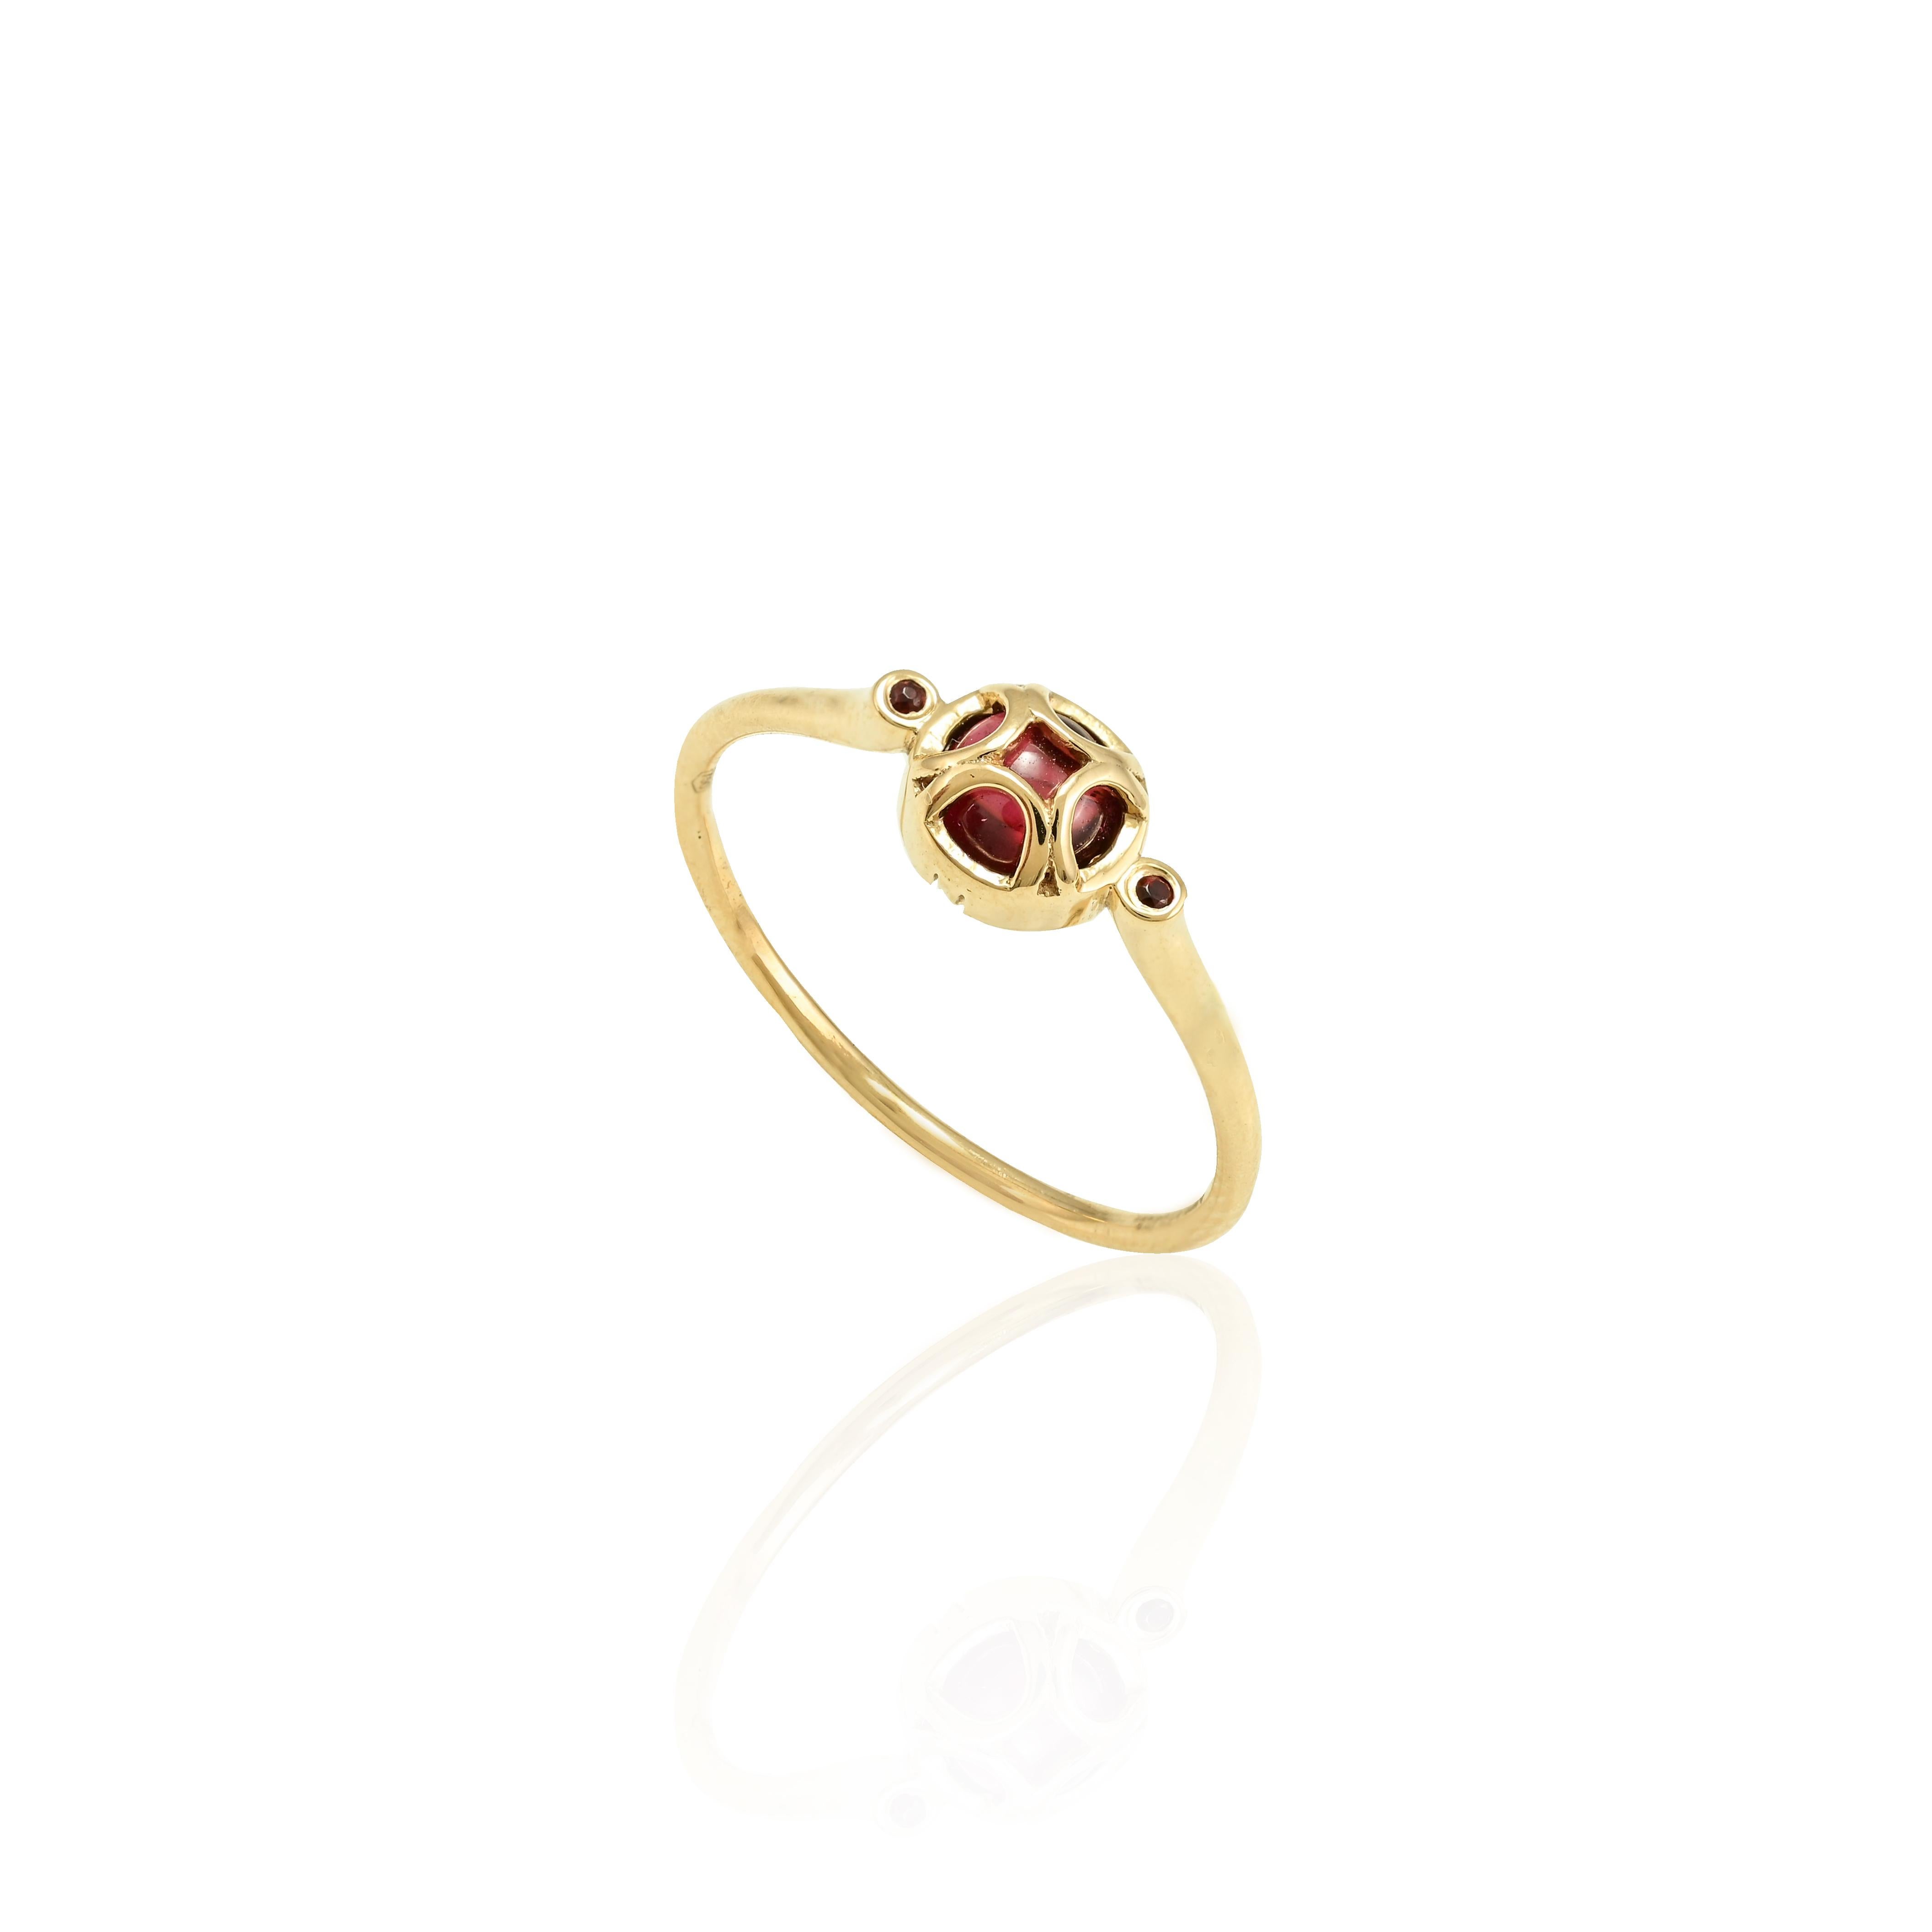 For Sale:  Everyday Minimalist Garnet Ring in 18k Solid Yellow Gold For Her 3